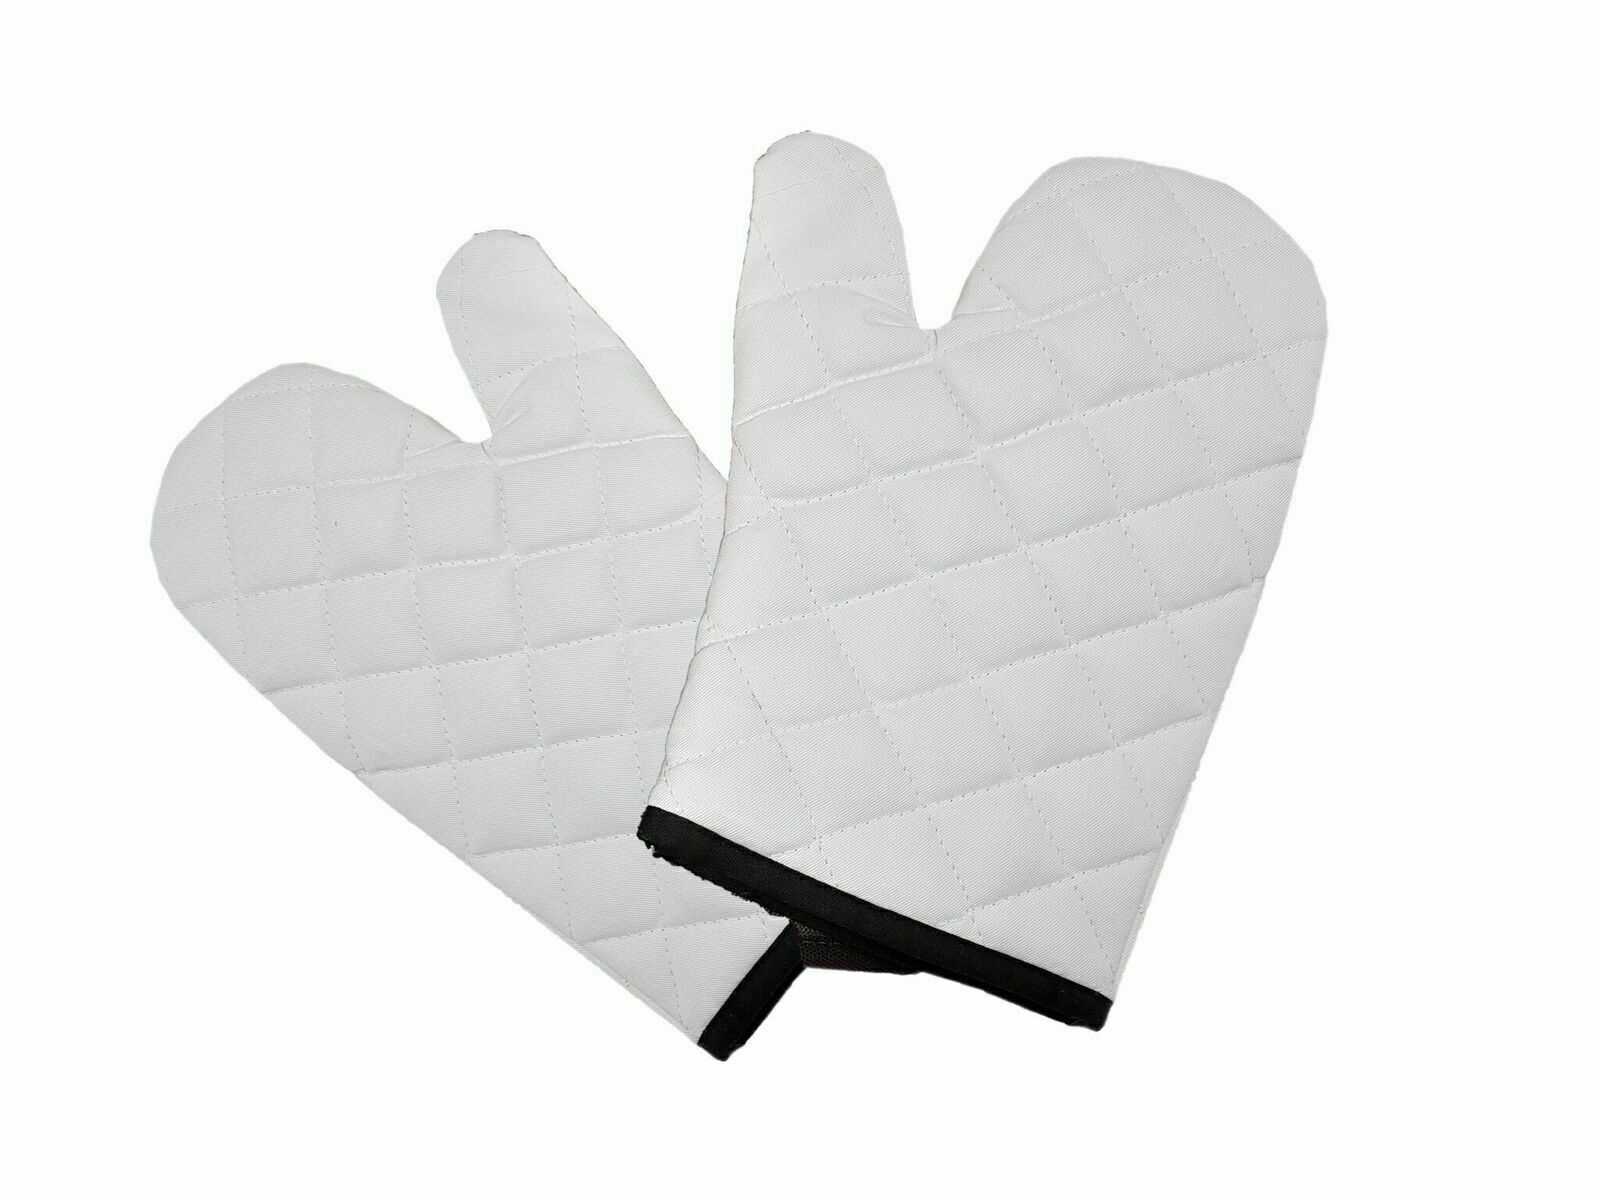 1 Pair Oven Gloves Heat Resistant Quilted Mitts Skin Friendly For Cooking Baking